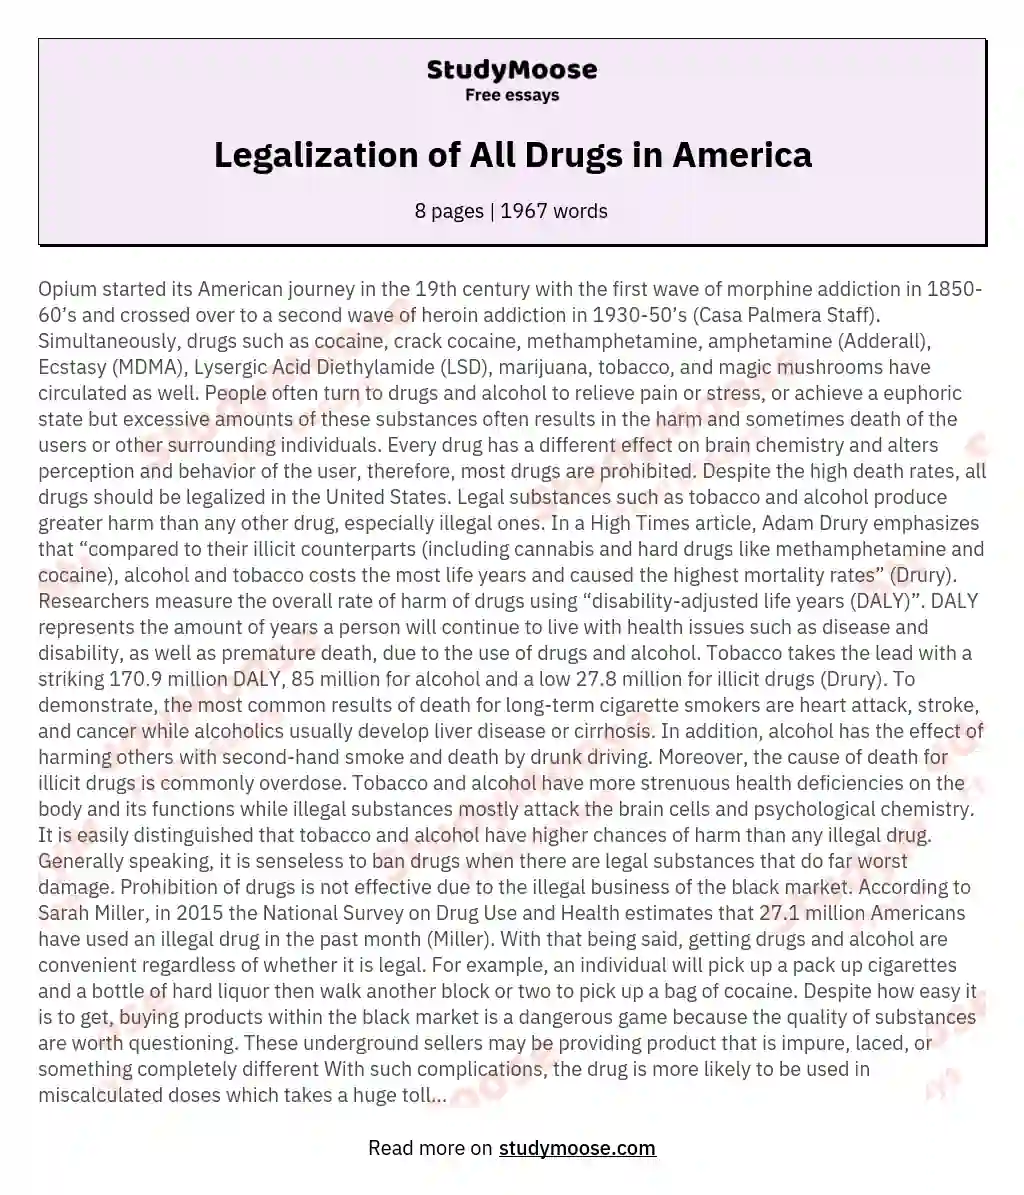 Legalization of All Drugs in America essay